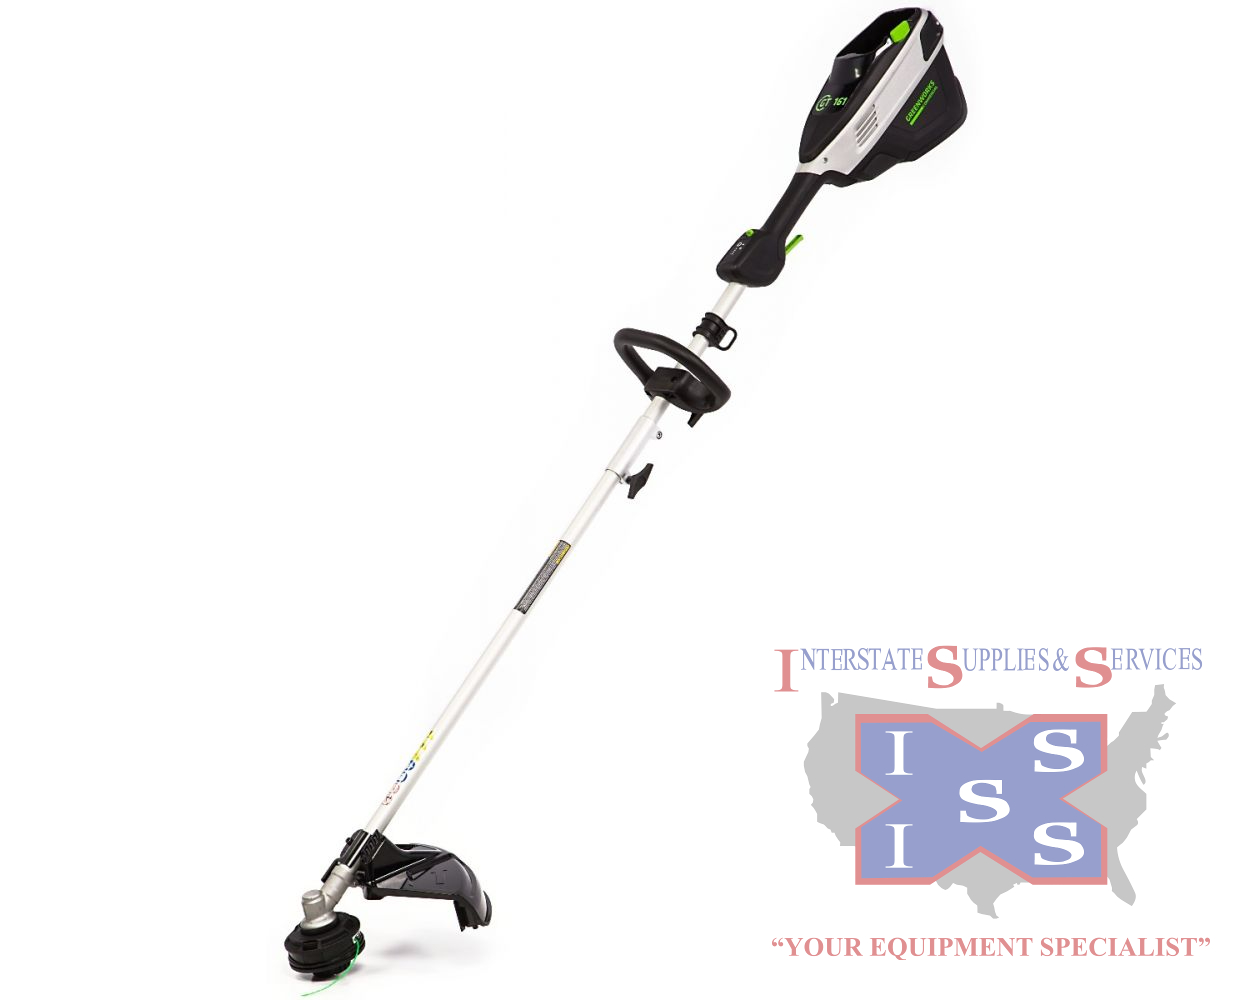 GT161 82-Volt 16" Attachment-Capable String Trimmer (Tool Only)